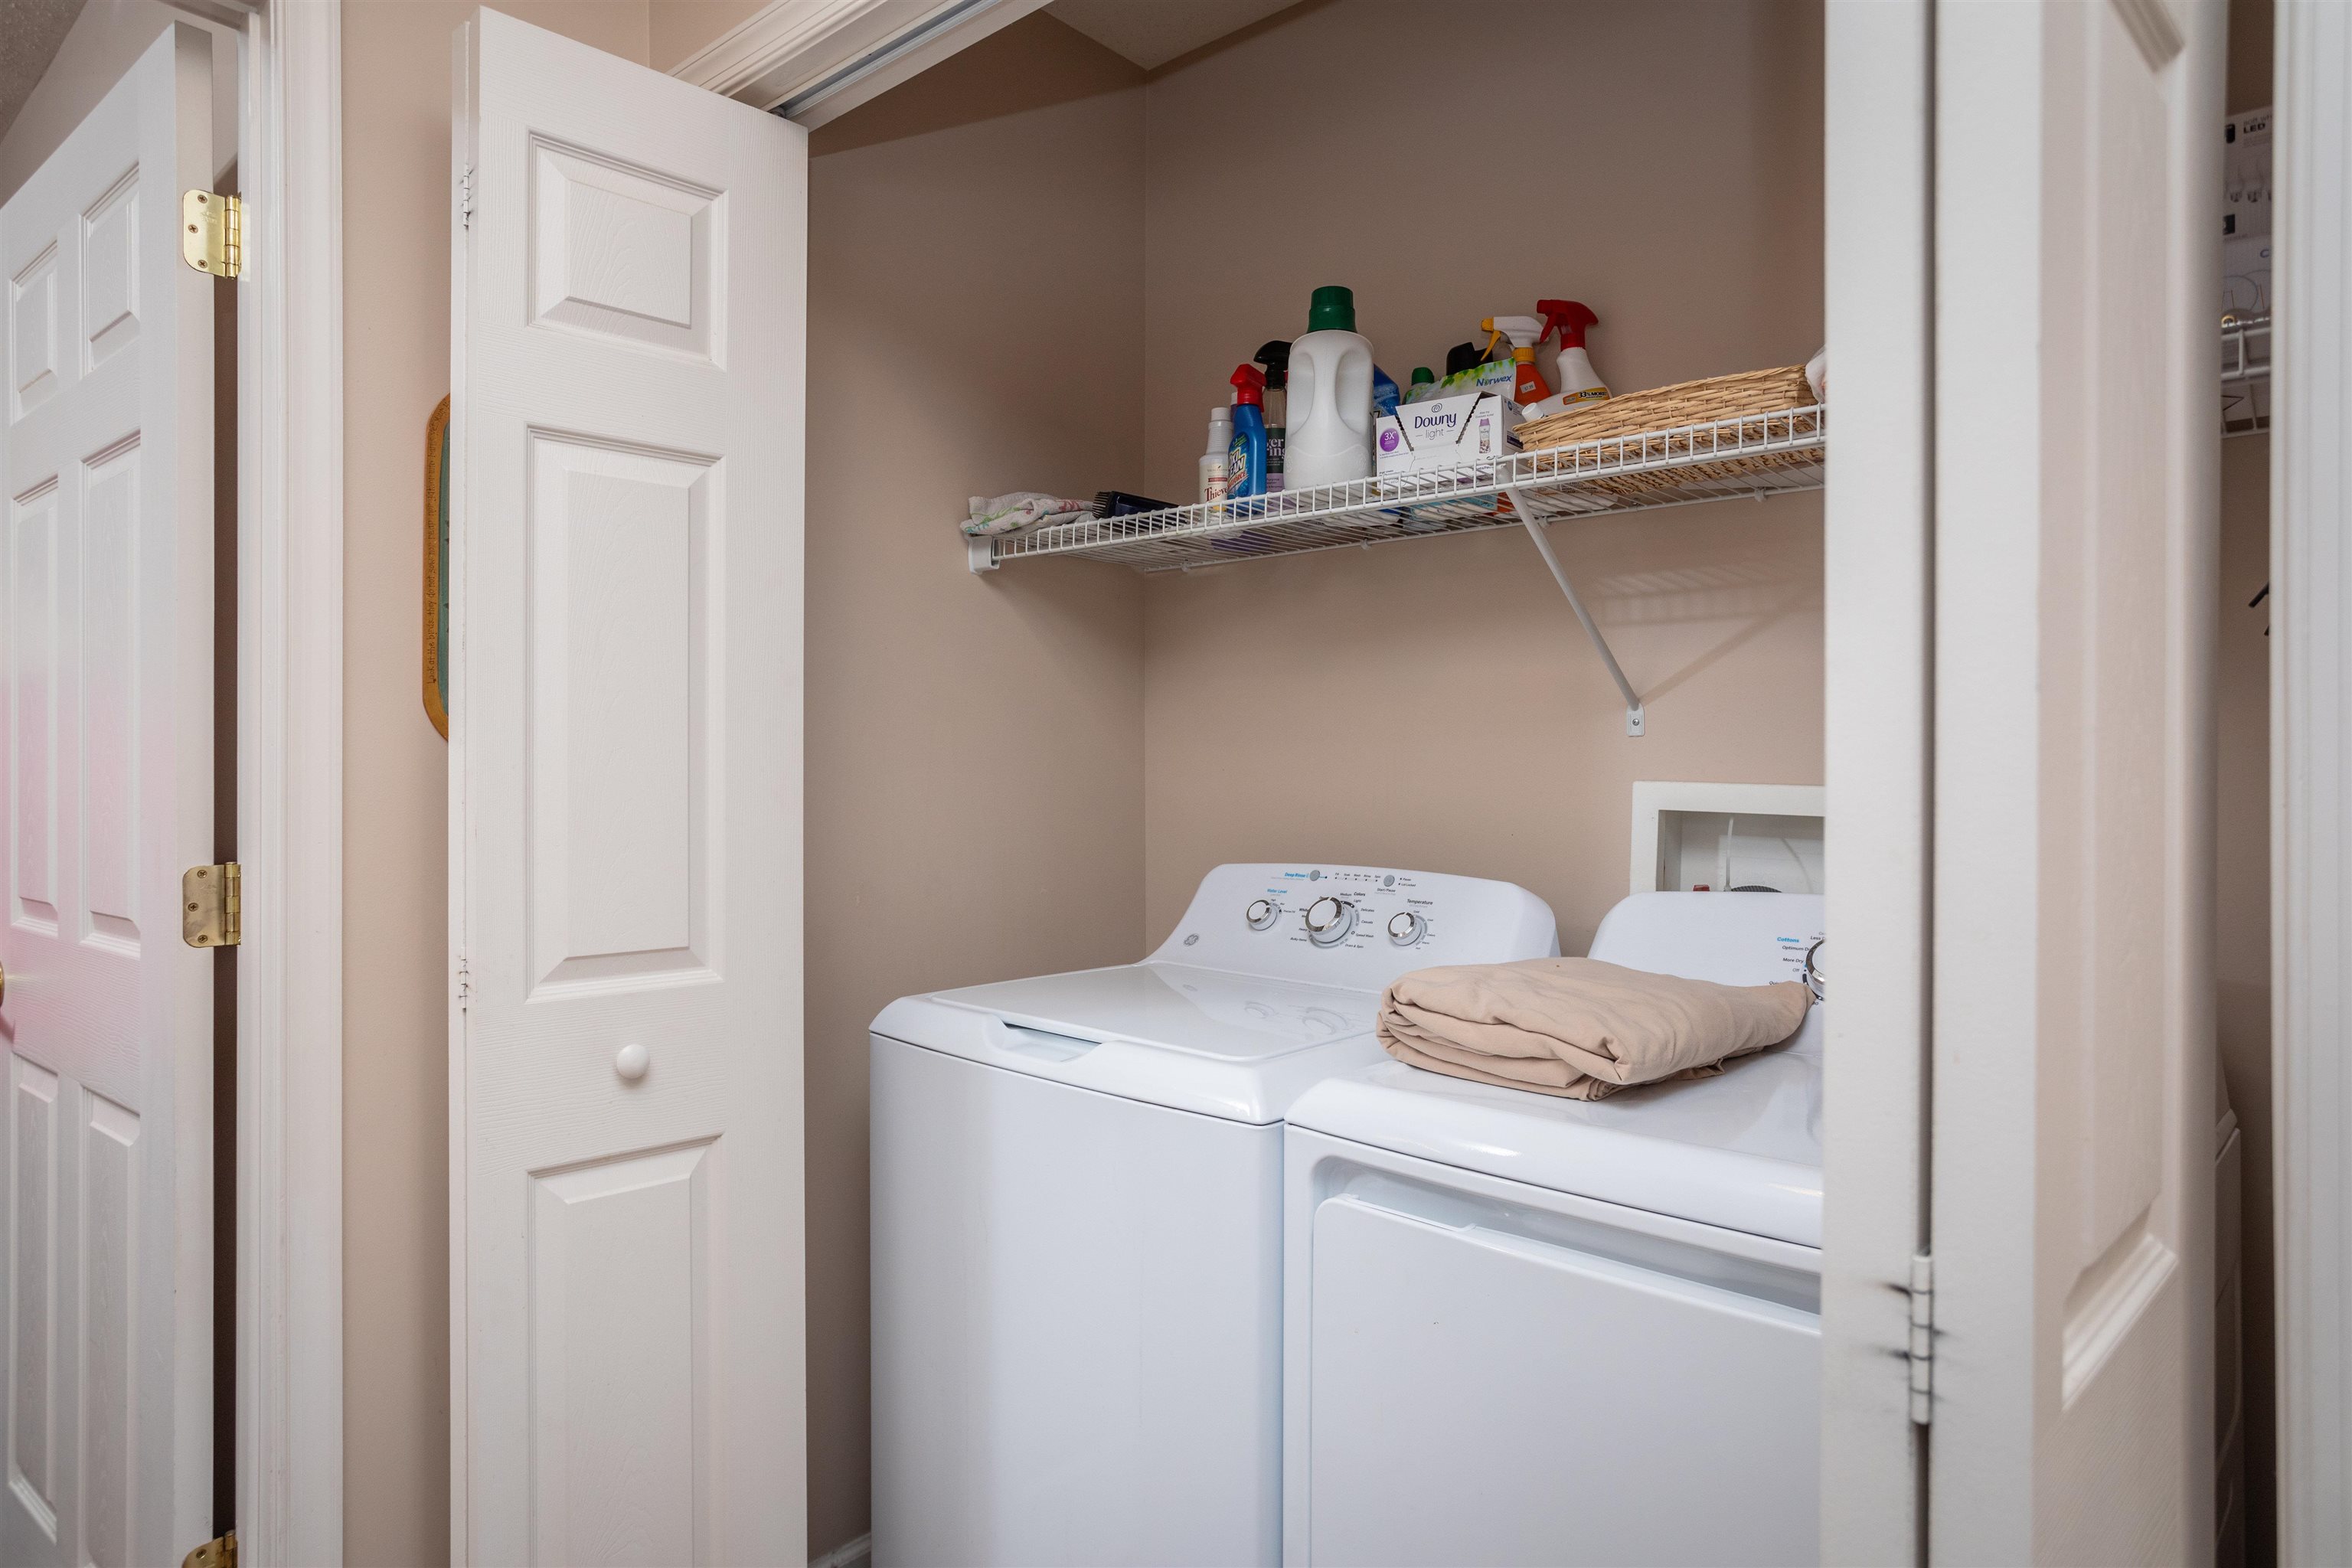 The laundry is conveniently located. The dryer and new washing machine both convey